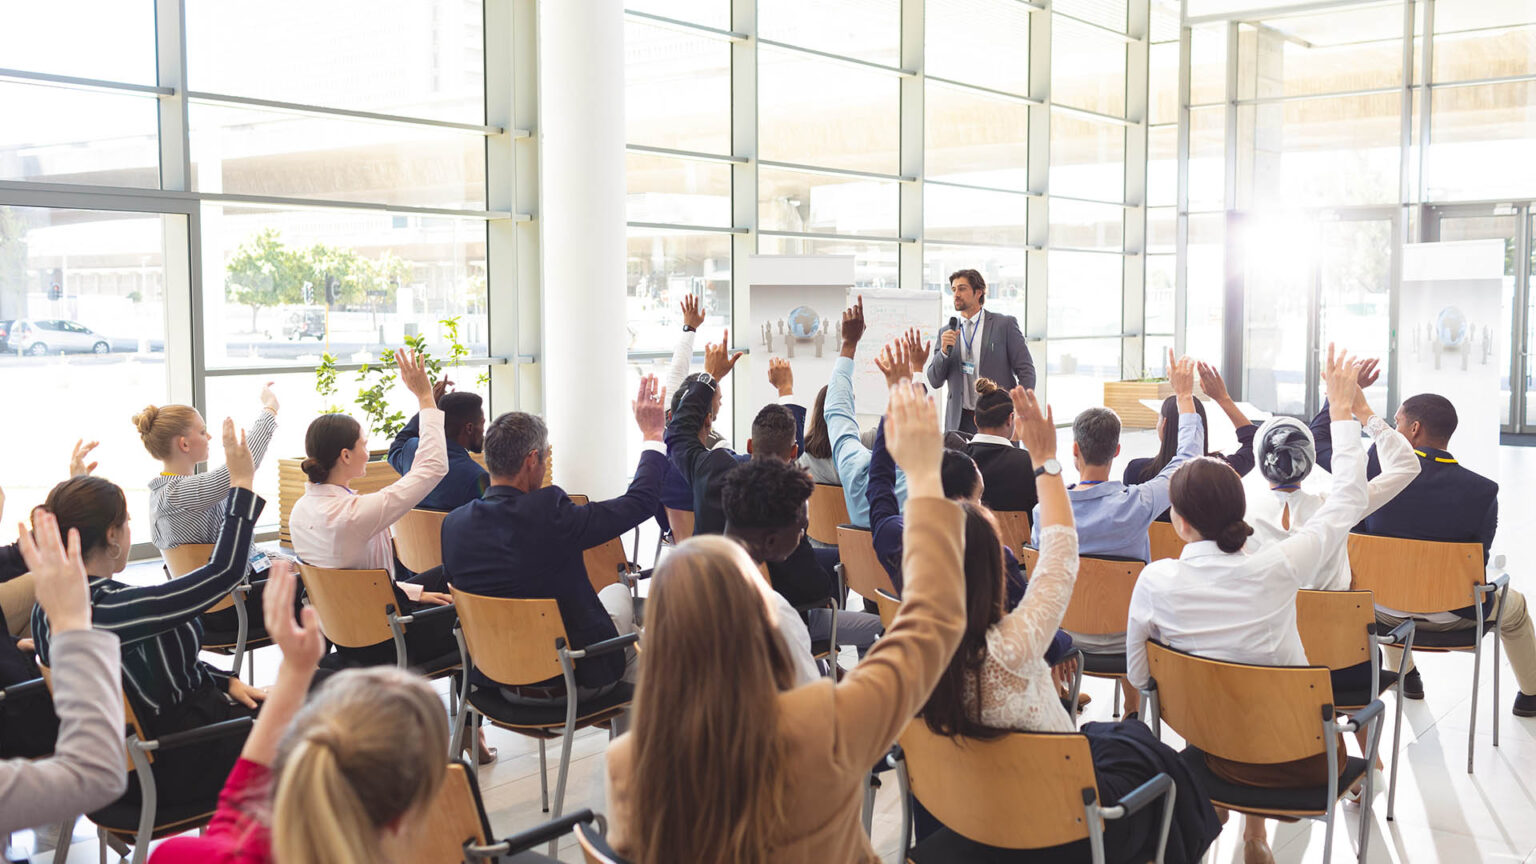 Rear view of interactive diverse business people listening to Caucasian businessman and raising hands to ask him questions in conference